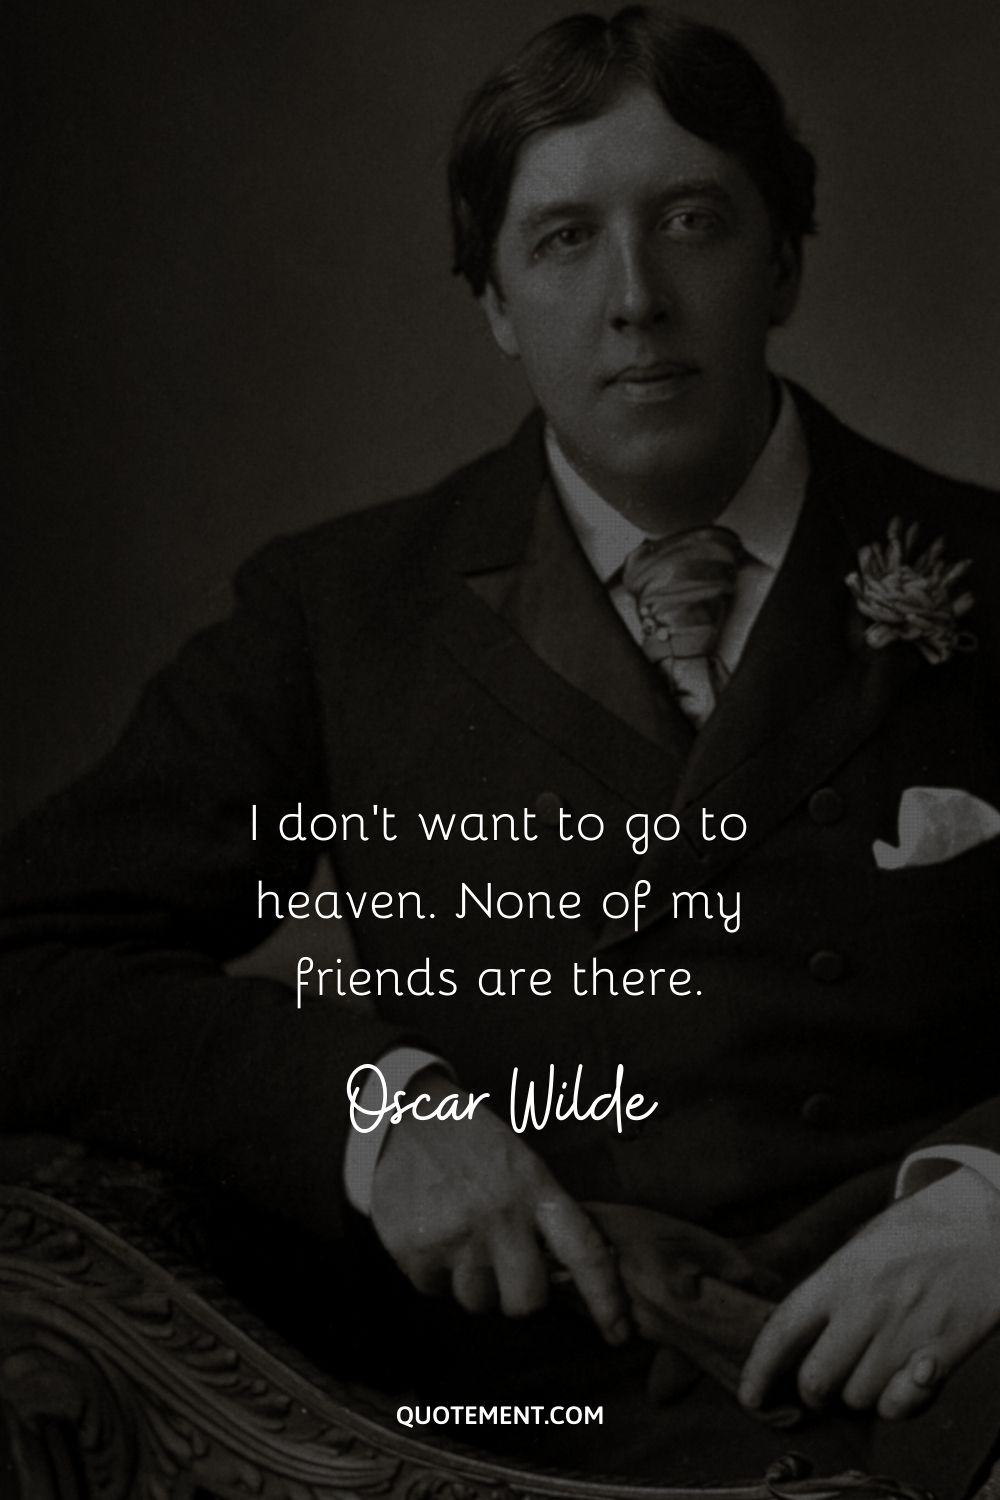 “I don't want to go to heaven. None of my friends are there.” ― Oscar Wilde